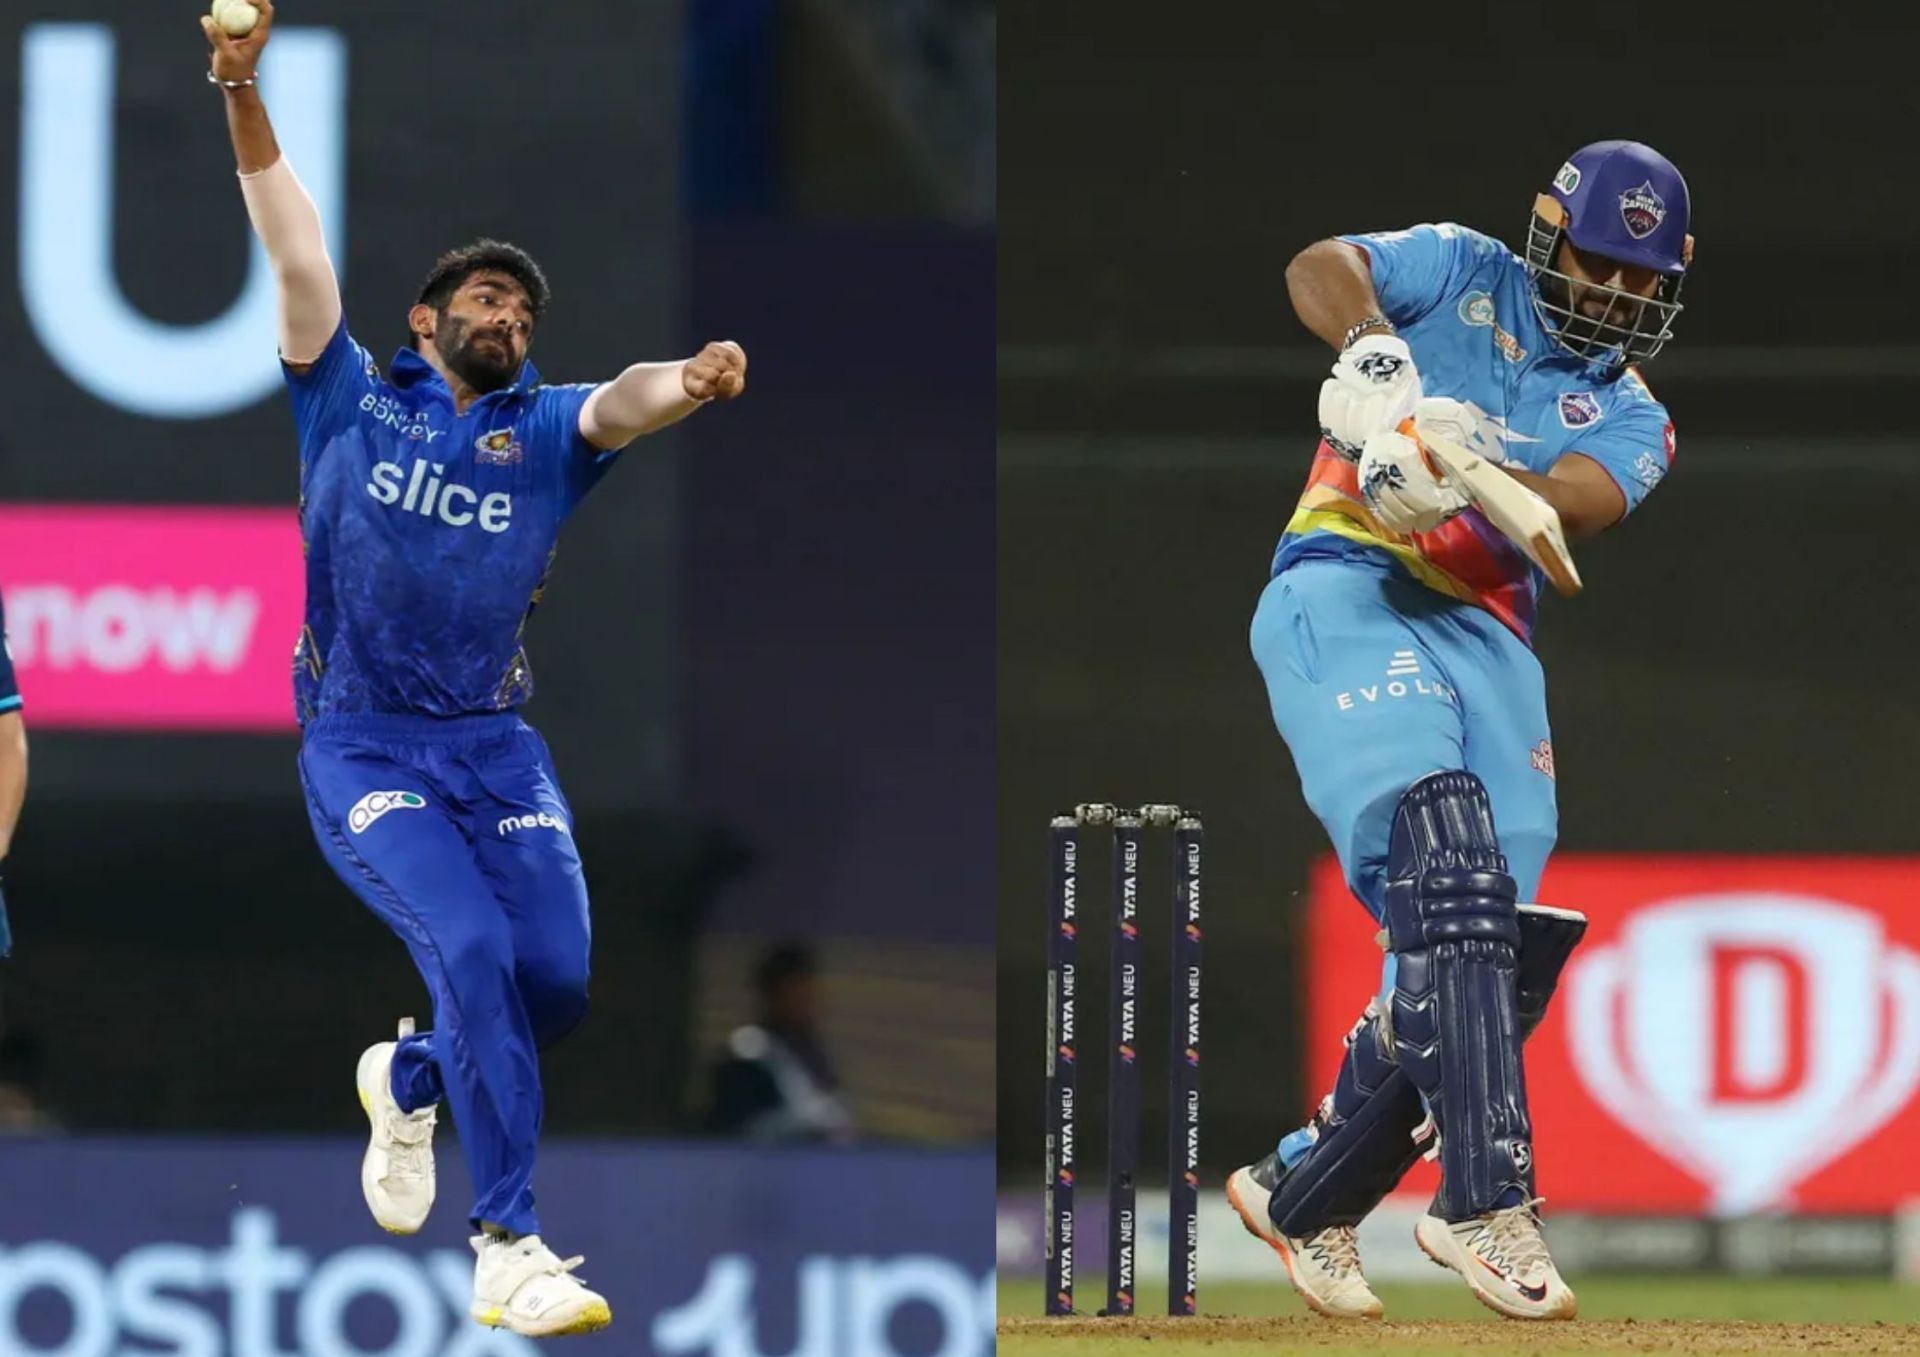 3 player battles to watch out for between MI and DC (Picture Credits: IPL).